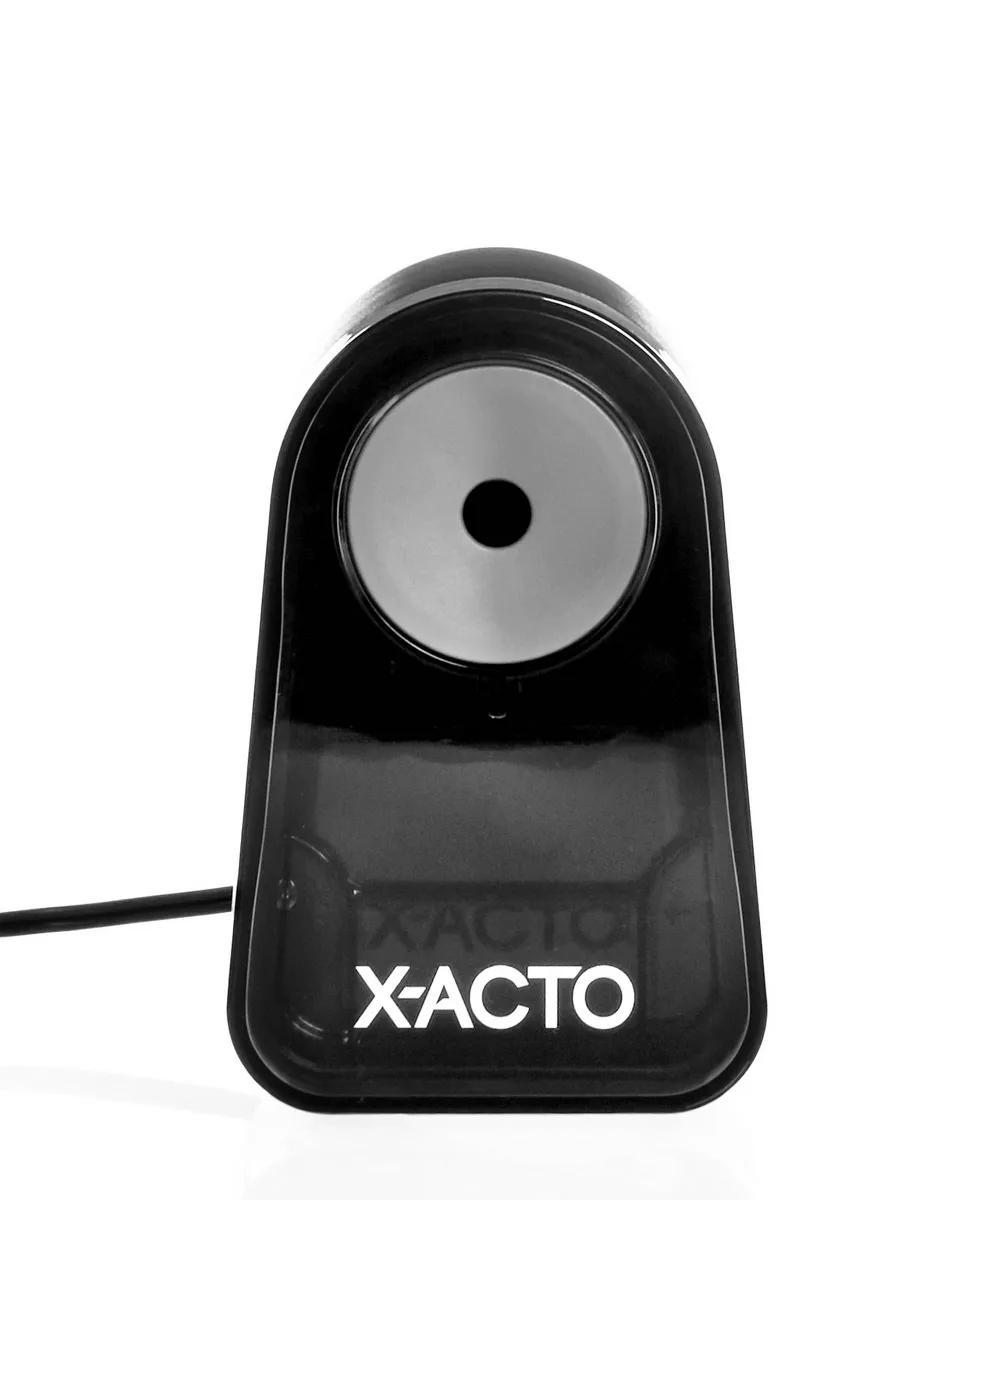 X-ACTO Mighty Mite Electric Pencil Sharpener; image 2 of 2